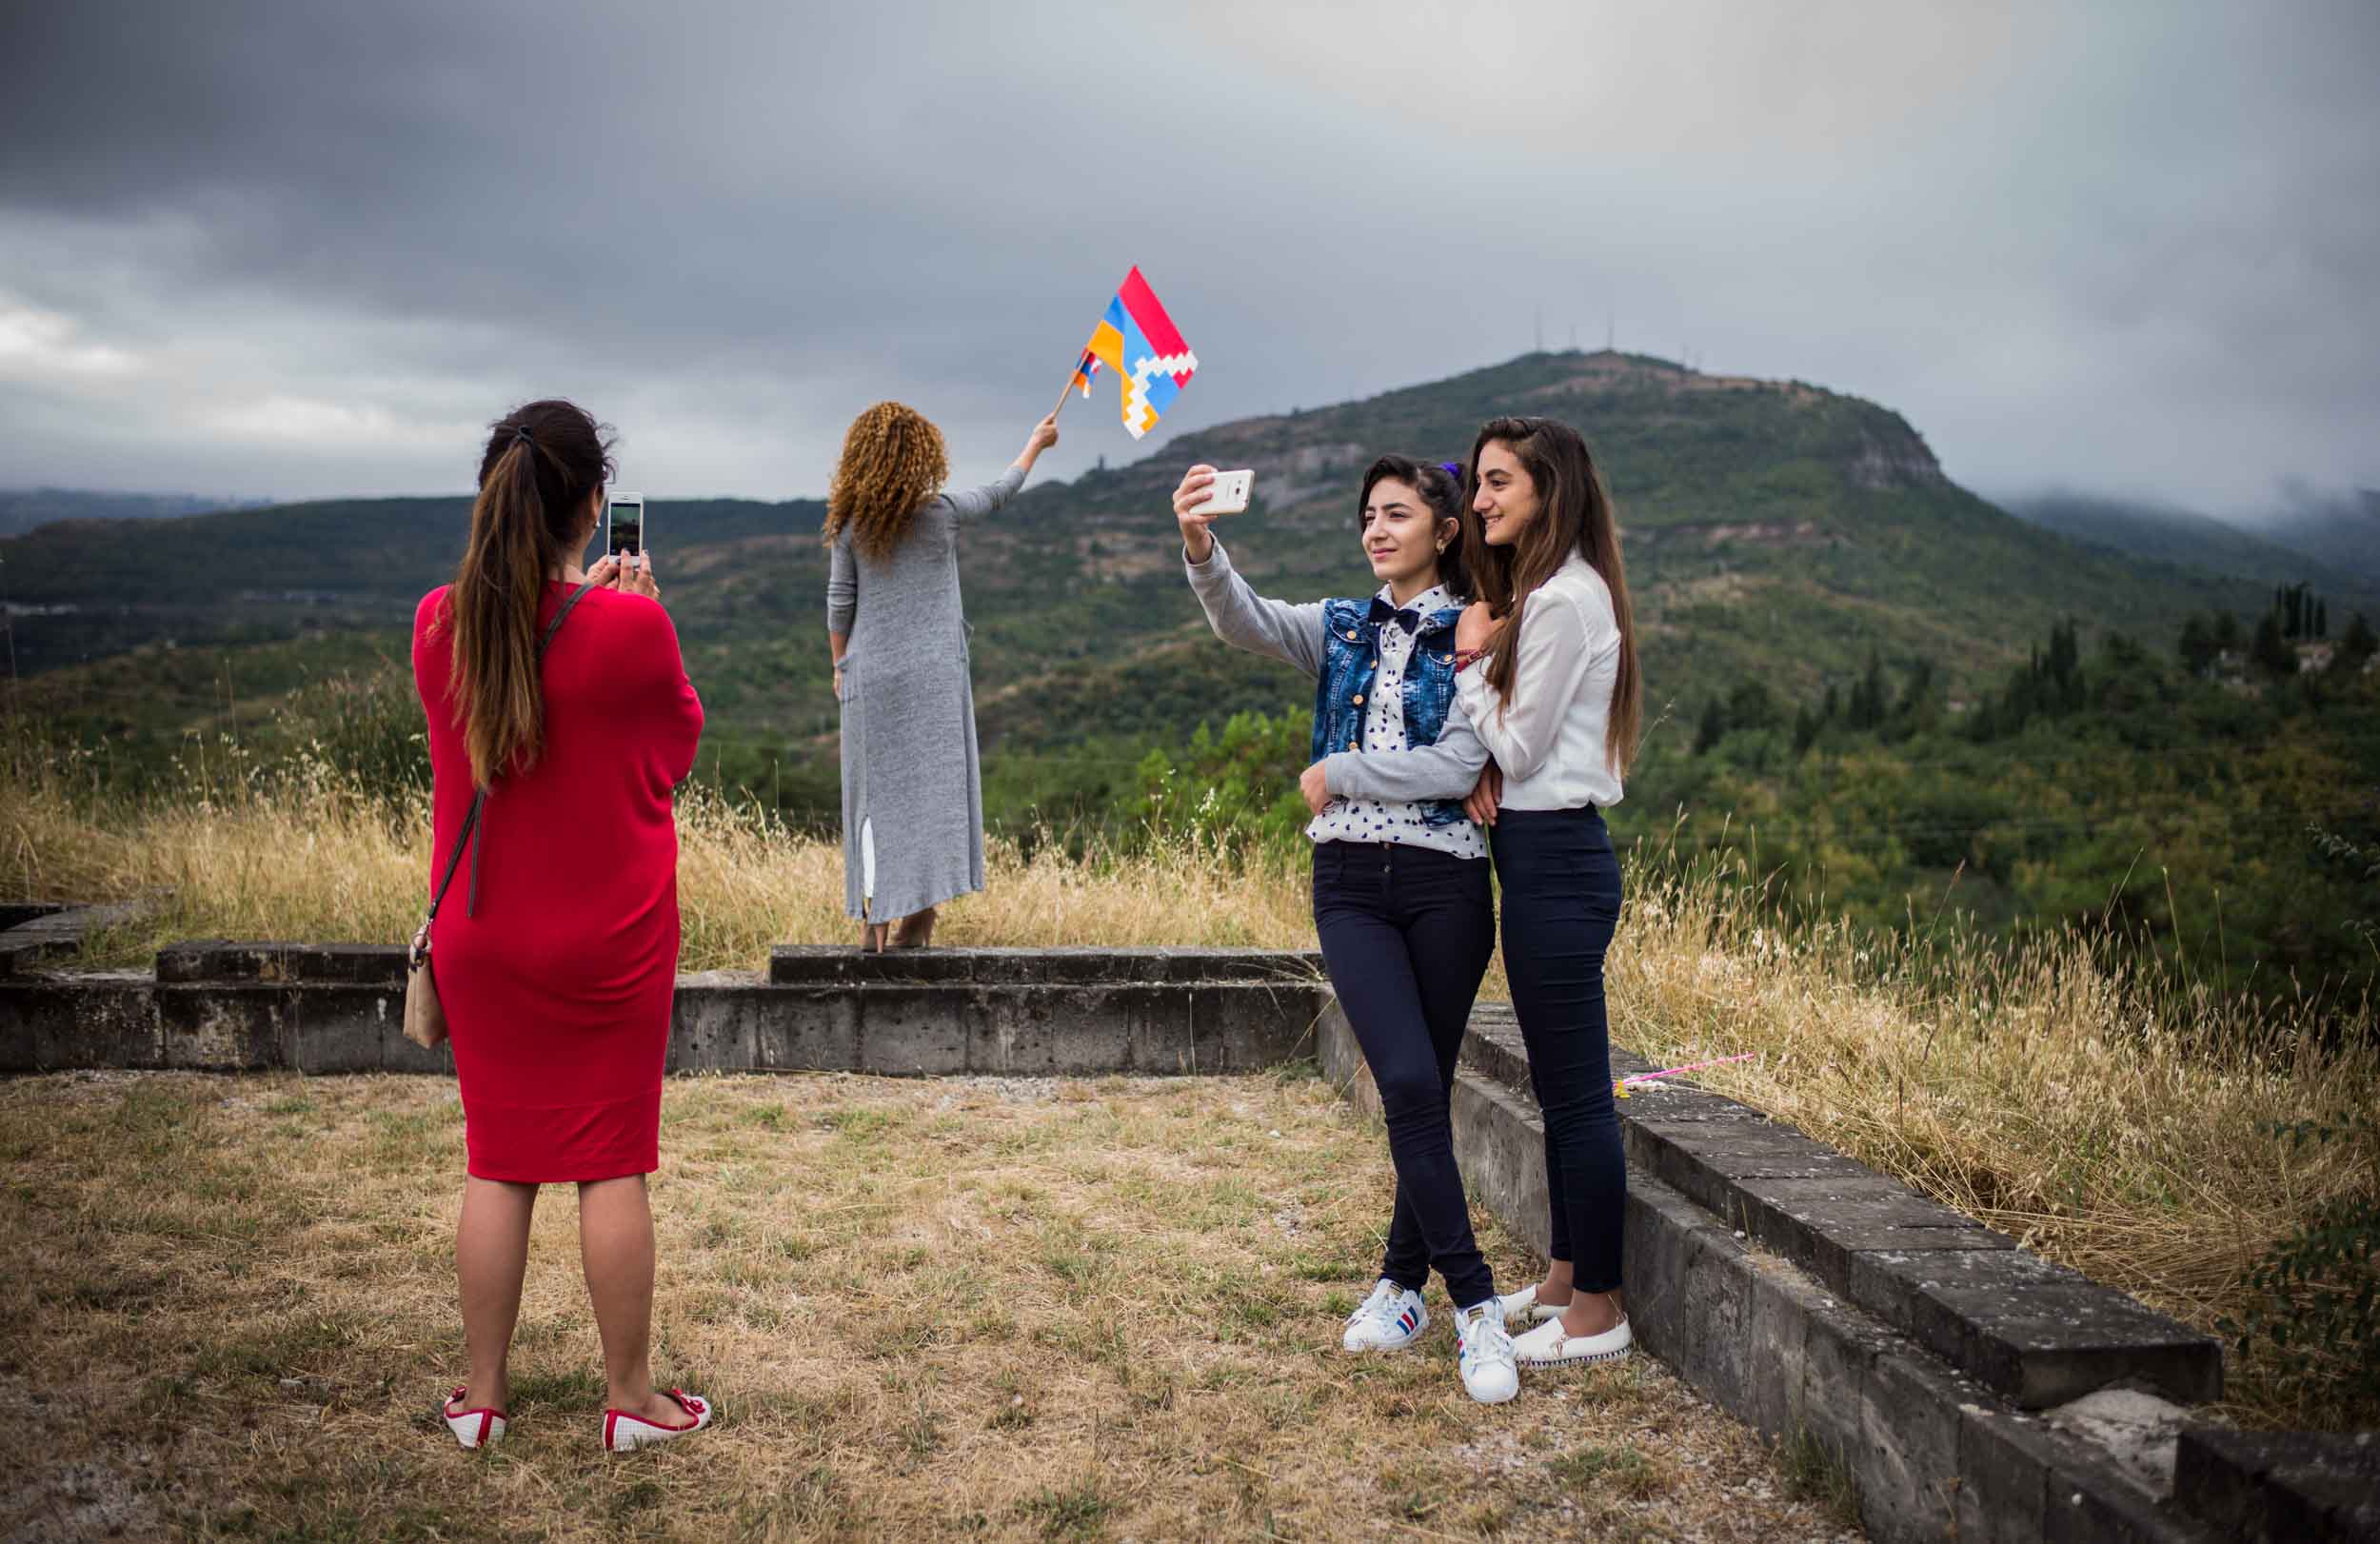  Women at the cementery of the fallen soldiers in Stepanakert after the independence march on the 02.09.2016 